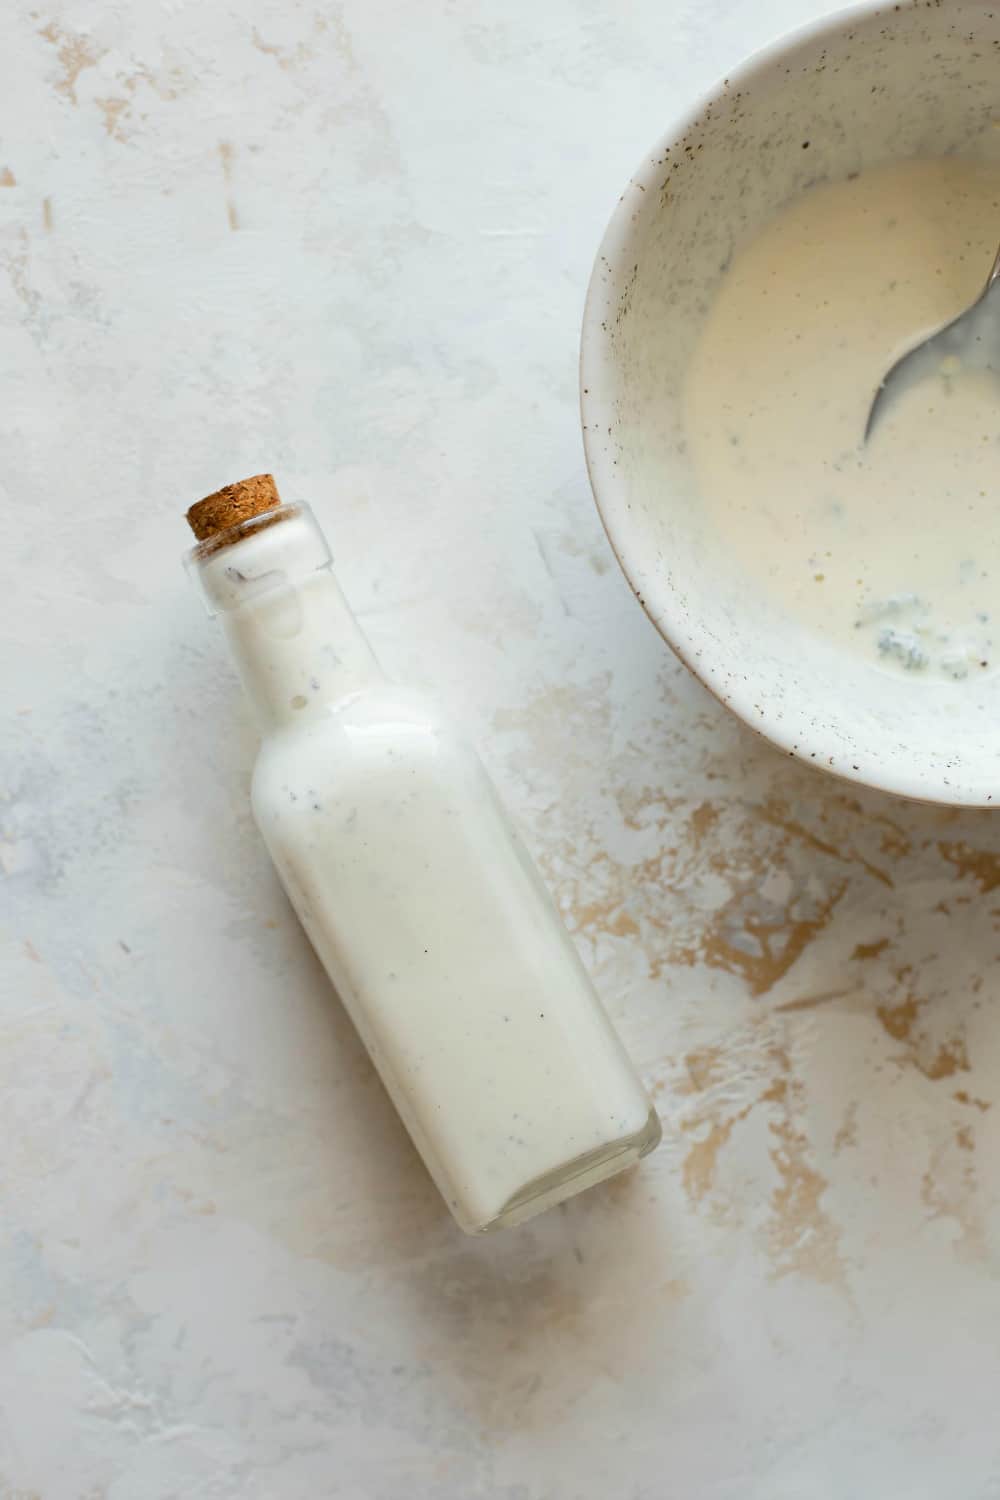 Bottle of blue cheese dressing next to a bowl of blue cheese dressing